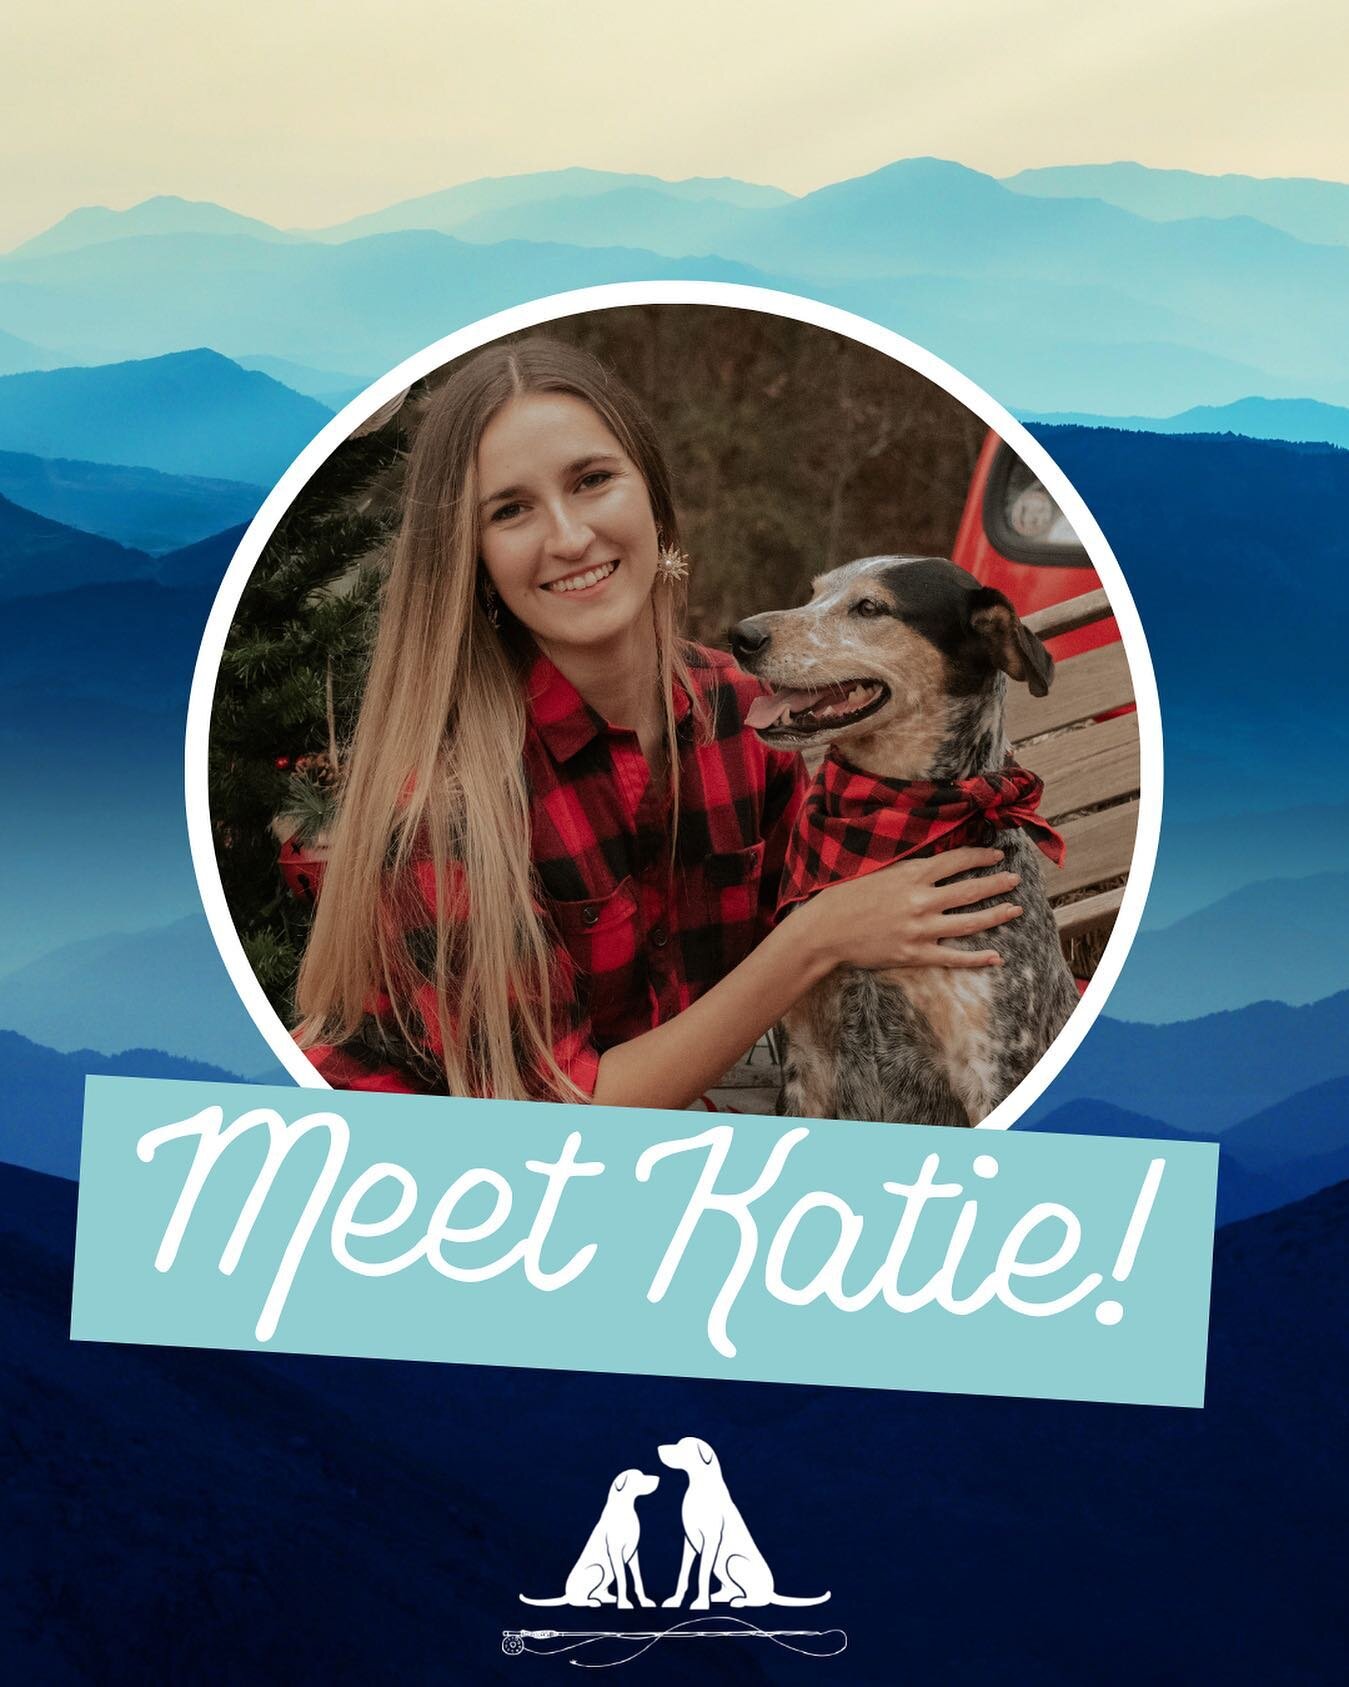 Hi-River crew say hello to Katie👋We are so excited to have her help &amp; expertise on the weekends every now &amp; then! 

She has a big heart for working with dogs &amp; has been doing it for over six years. 

Fun fact: She rescued her dog Easton 